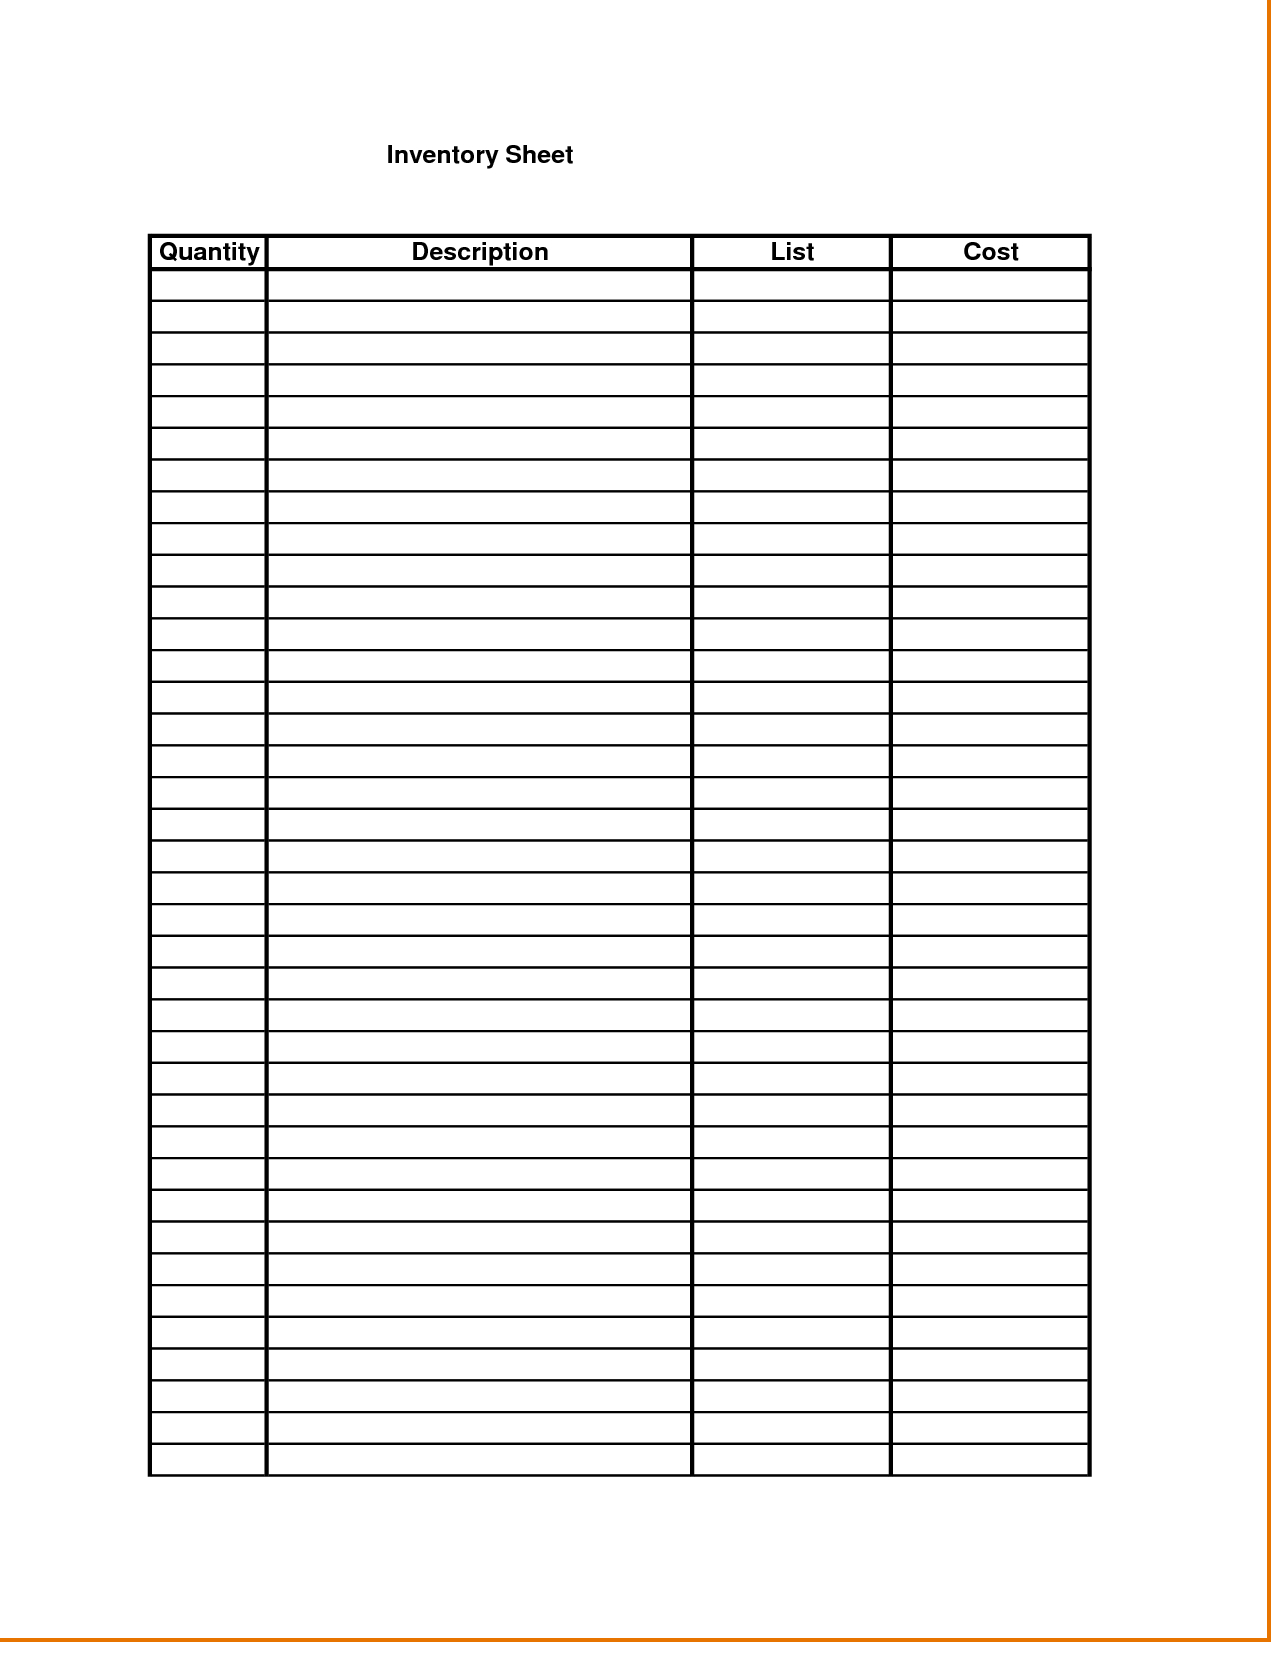 Inventory Management Spreadsheet Template With Regard To Excel Inventory Tracking Spreadsheet And Inventory Control Template